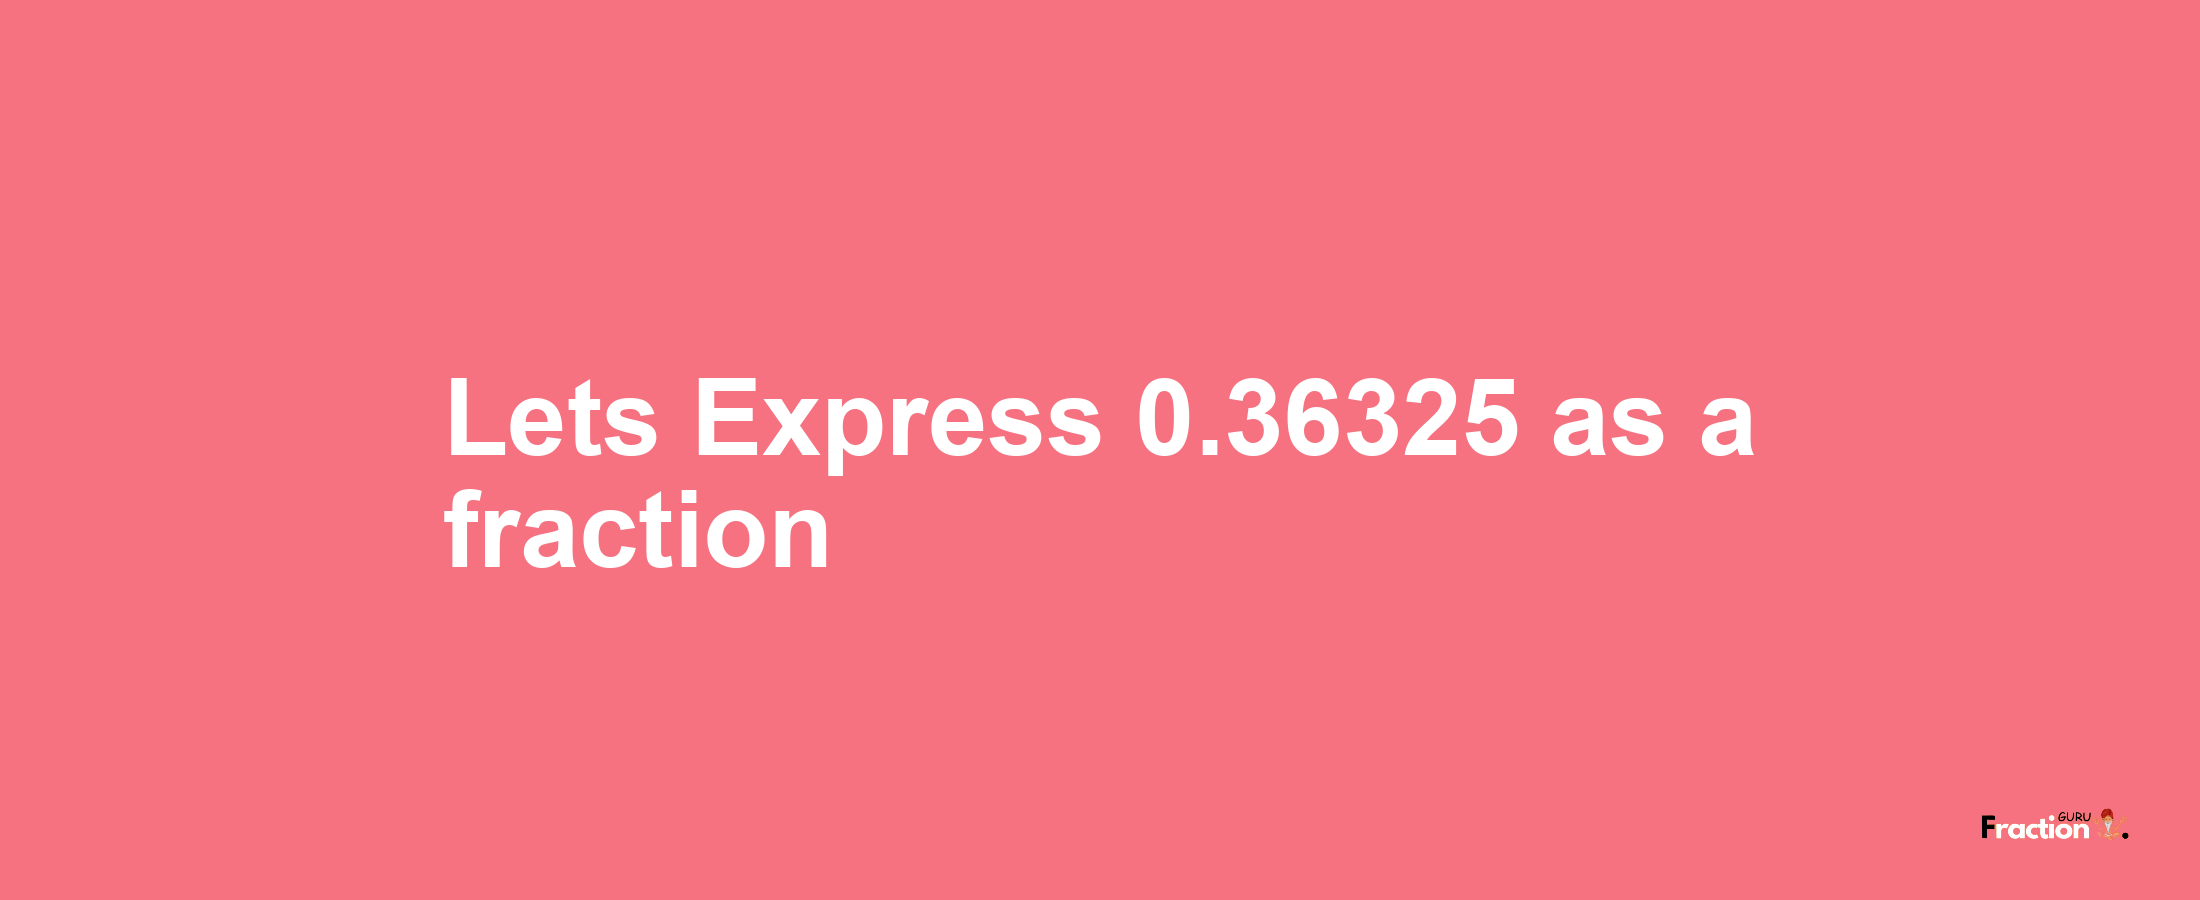 Lets Express 0.36325 as afraction